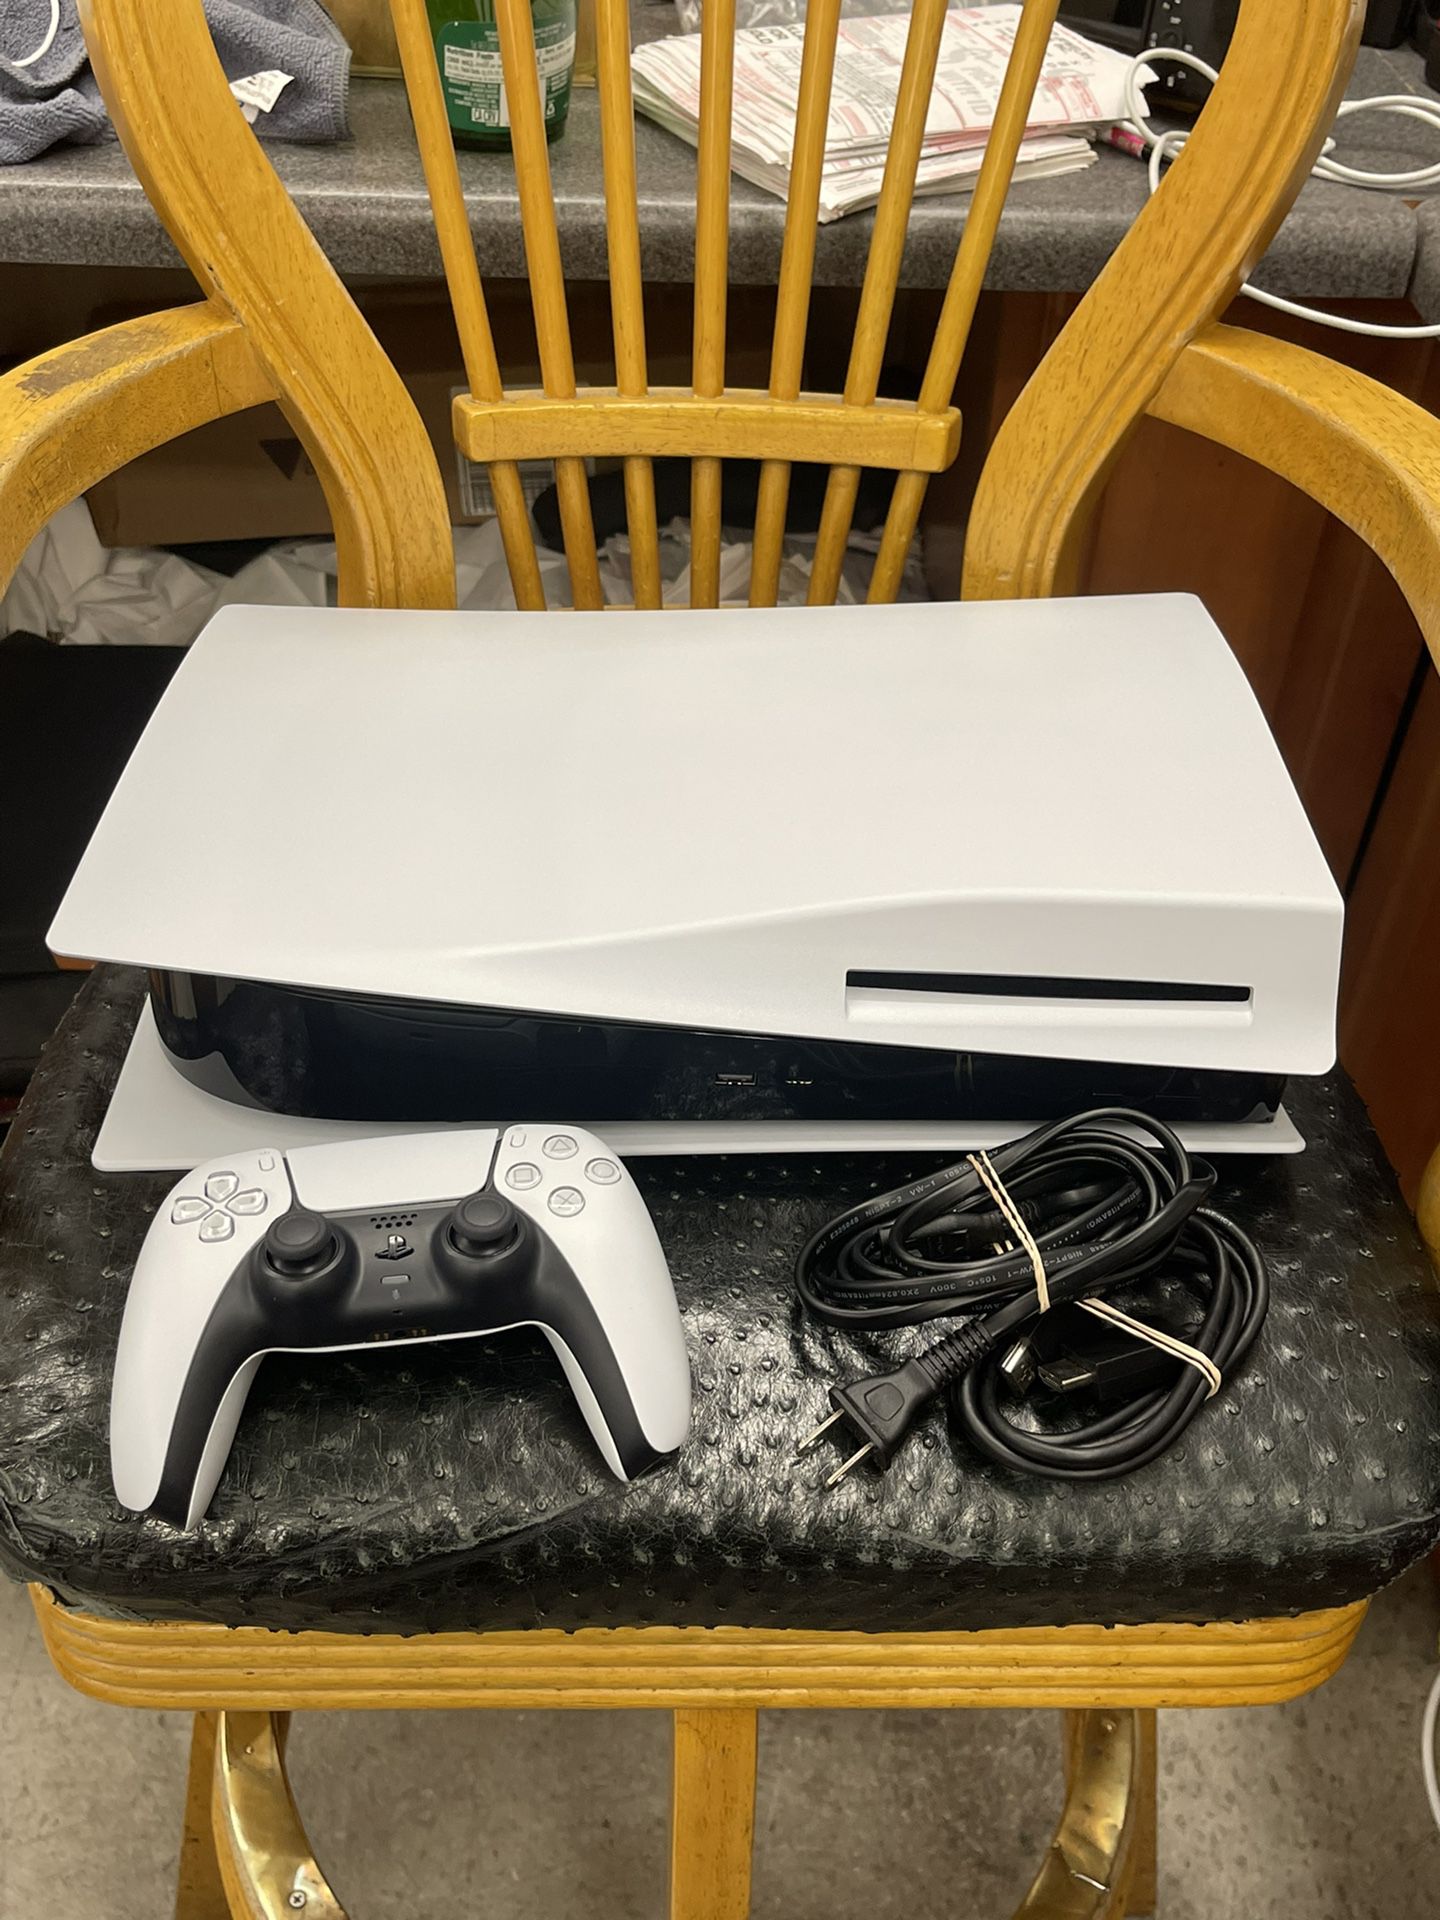 mavepine nudler Kro FIRM PRICE Sony PlayStation 5 PS5 Console Disc Edition IN HAND ready For  Pick Up In Store Or ship UPS for Sale in Long Beach, CA - OfferUp